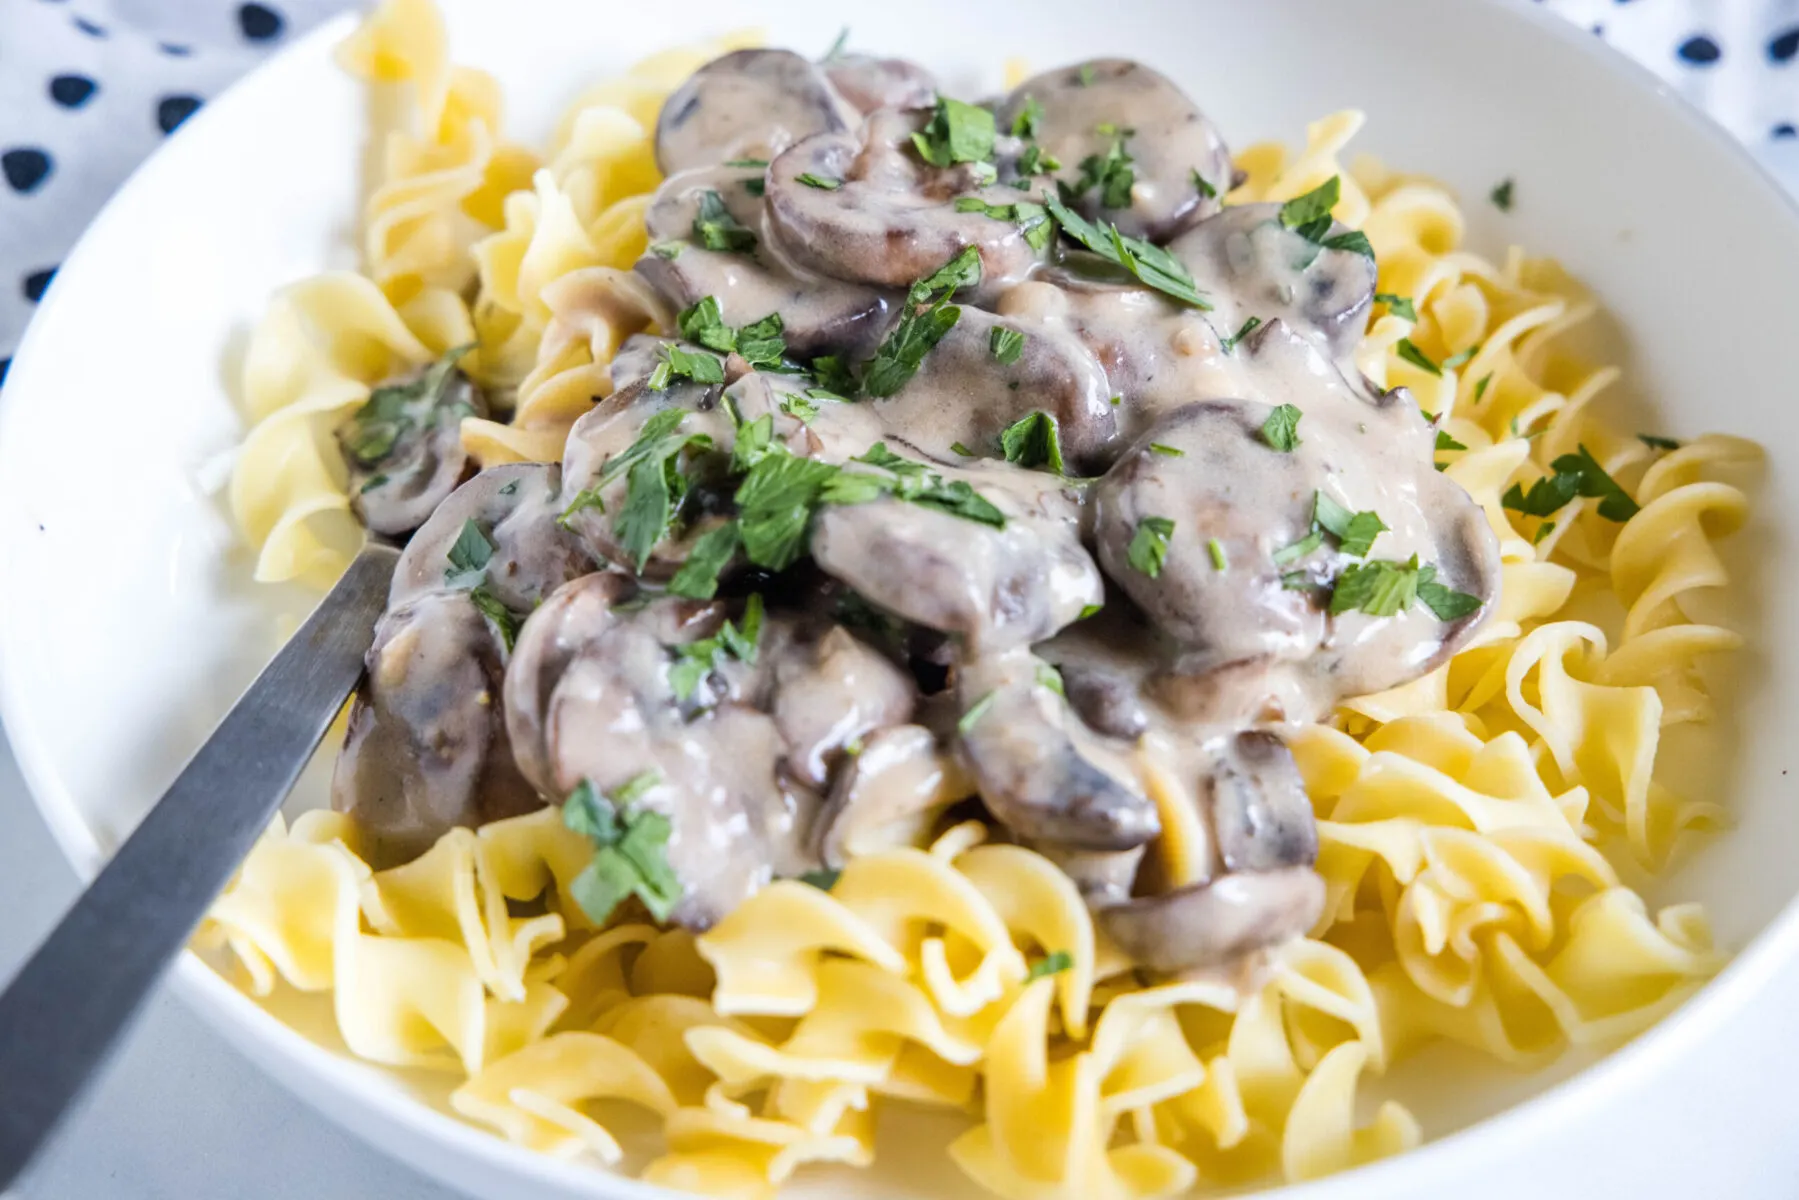 A bowl of noodles topped with mushroom stroganoff, with a fork